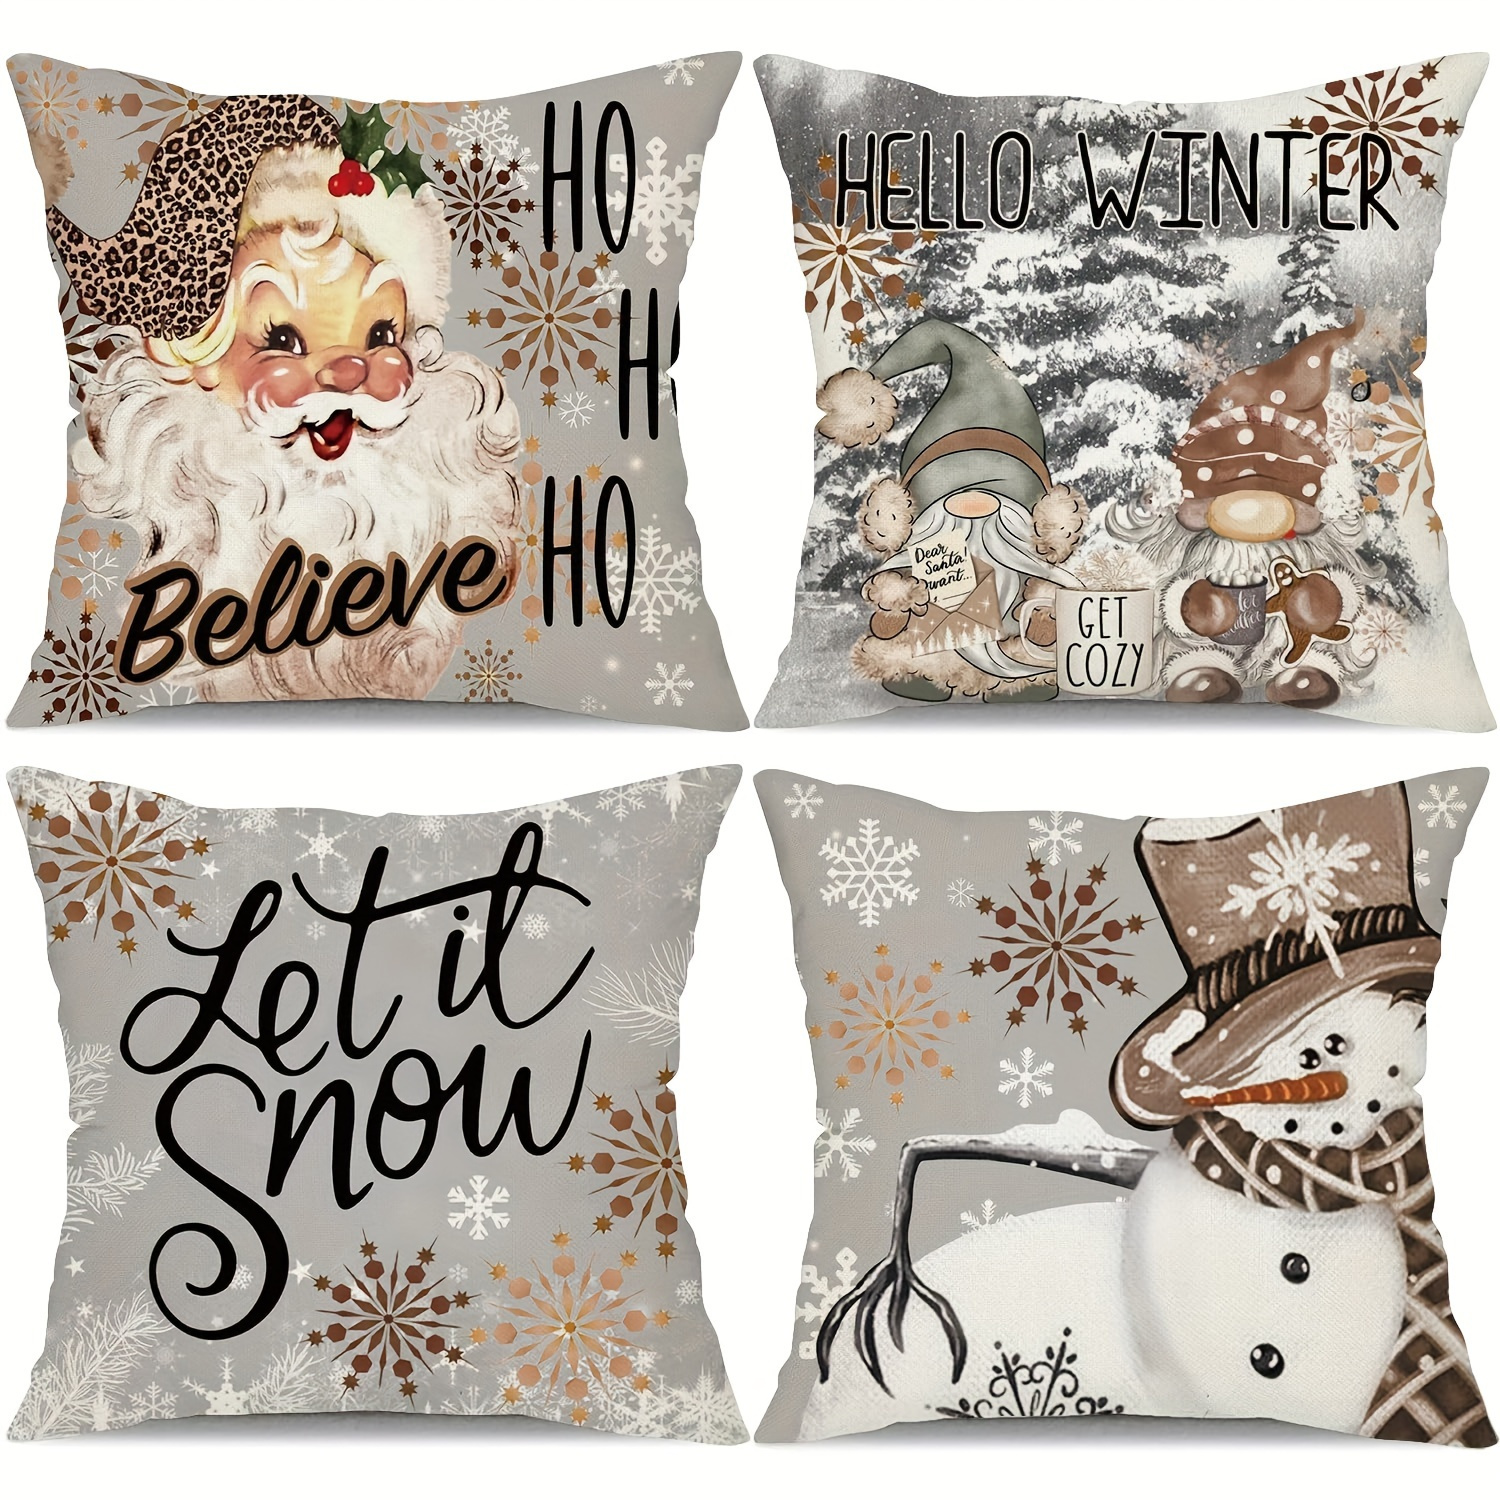 

4pcs Linen Mixed Weave Santa Claus Gnome Snowman Throw Pillow Cover Christmas Gift Home Accessories Living Room Sofa Bedroom Contemporary Style Zipper Pillow Case Without Pillow Core